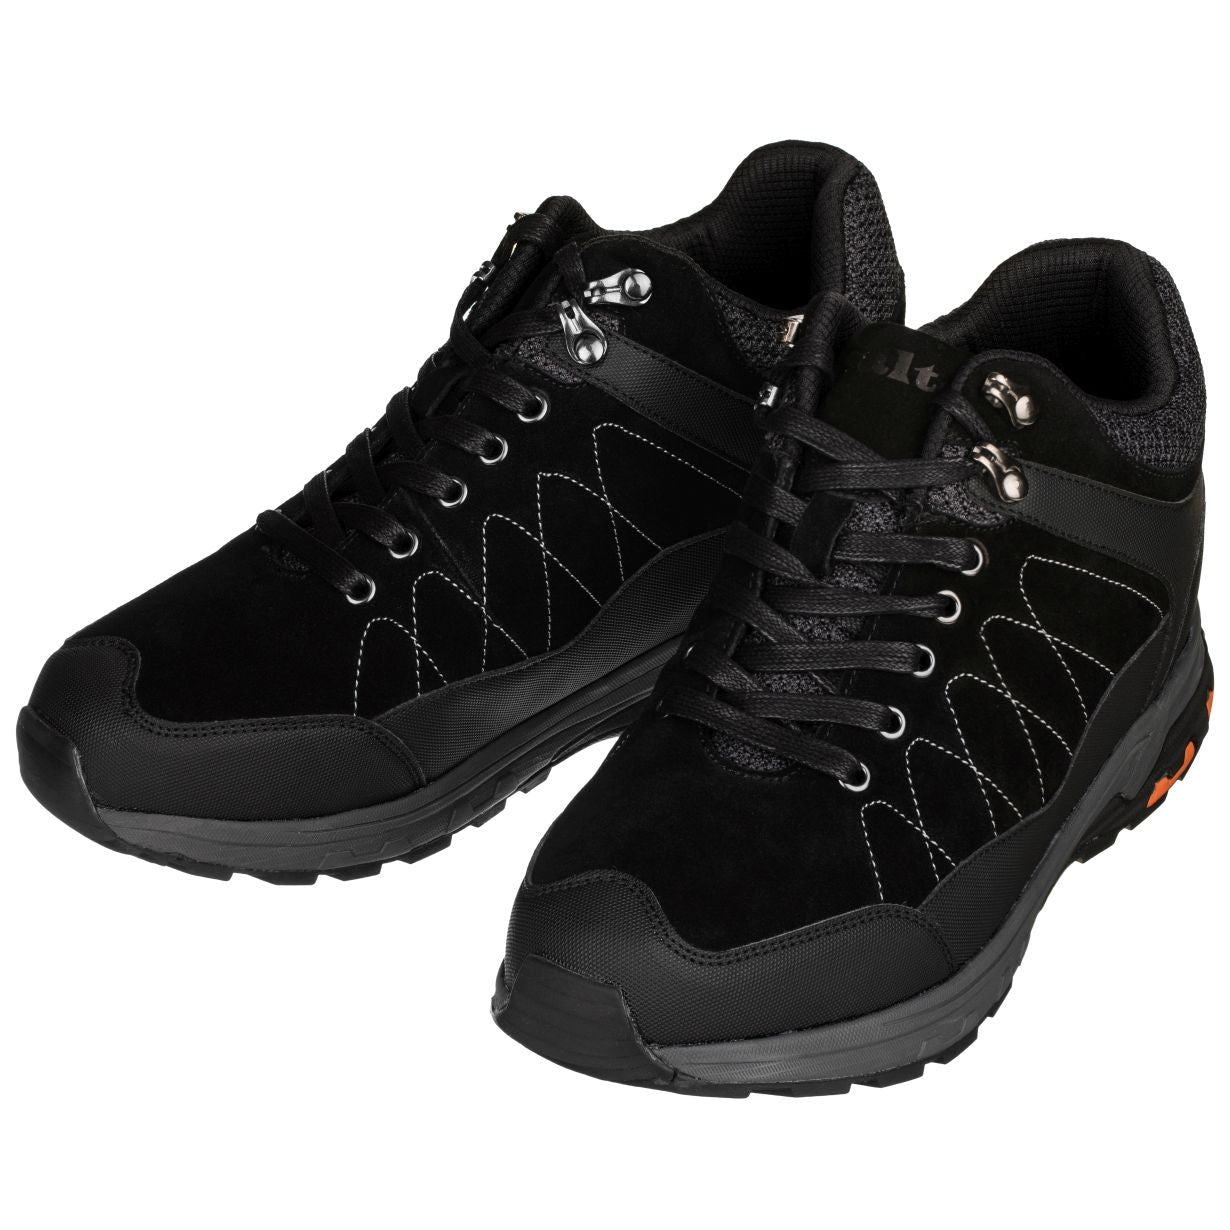 Elevator shoes height increase CALTO - H75470 - 3.2 Inches Taller (Black) - Hiking Style Boots